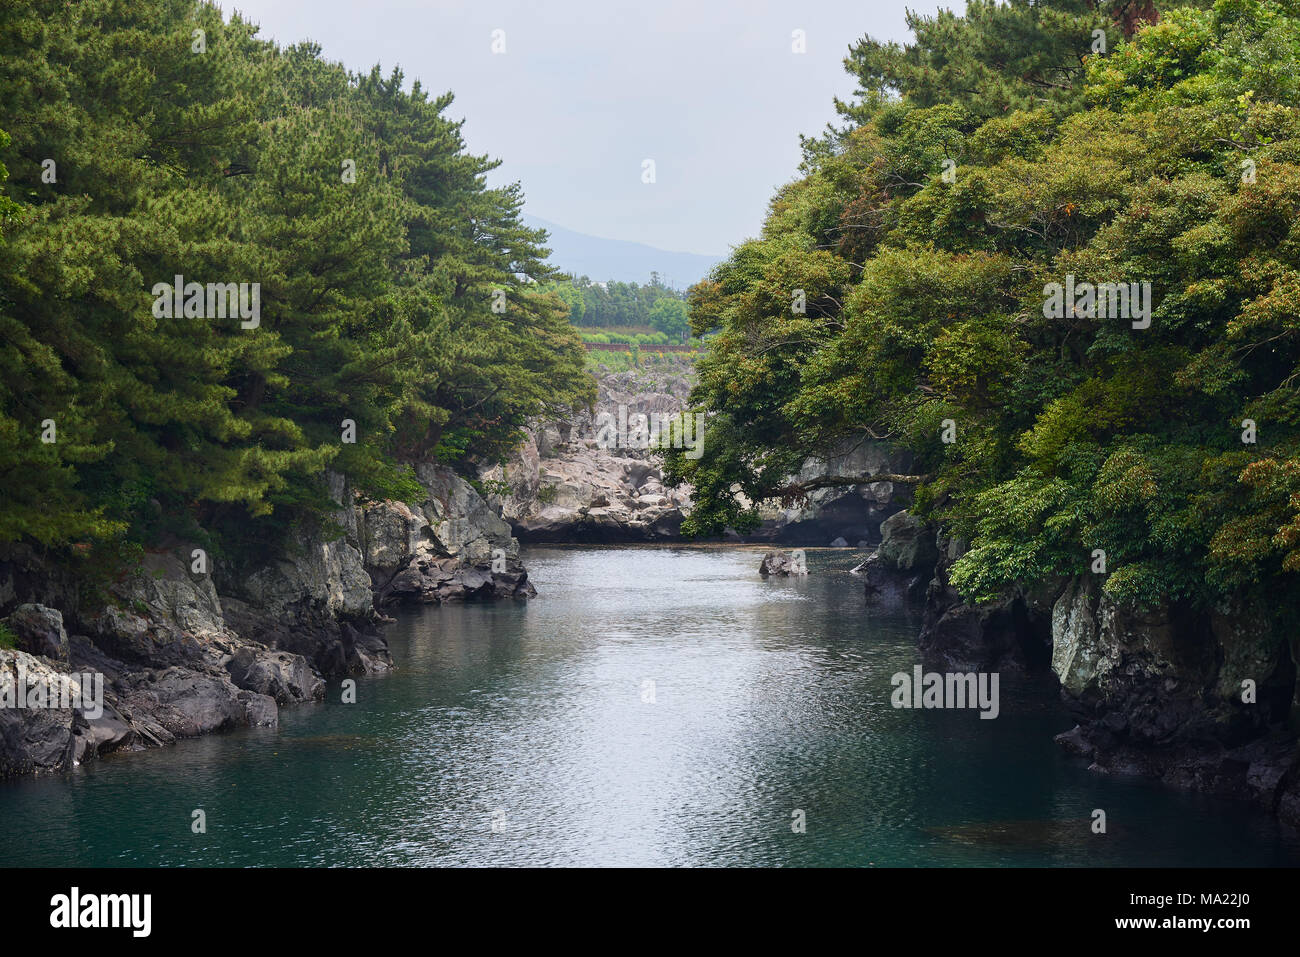 Soesokkak Estuary in Seogwipo-si. It is a attraction famous for its beautiful terrain formed by stream and seawater erosion in rocks made of lava flow Stock Photo